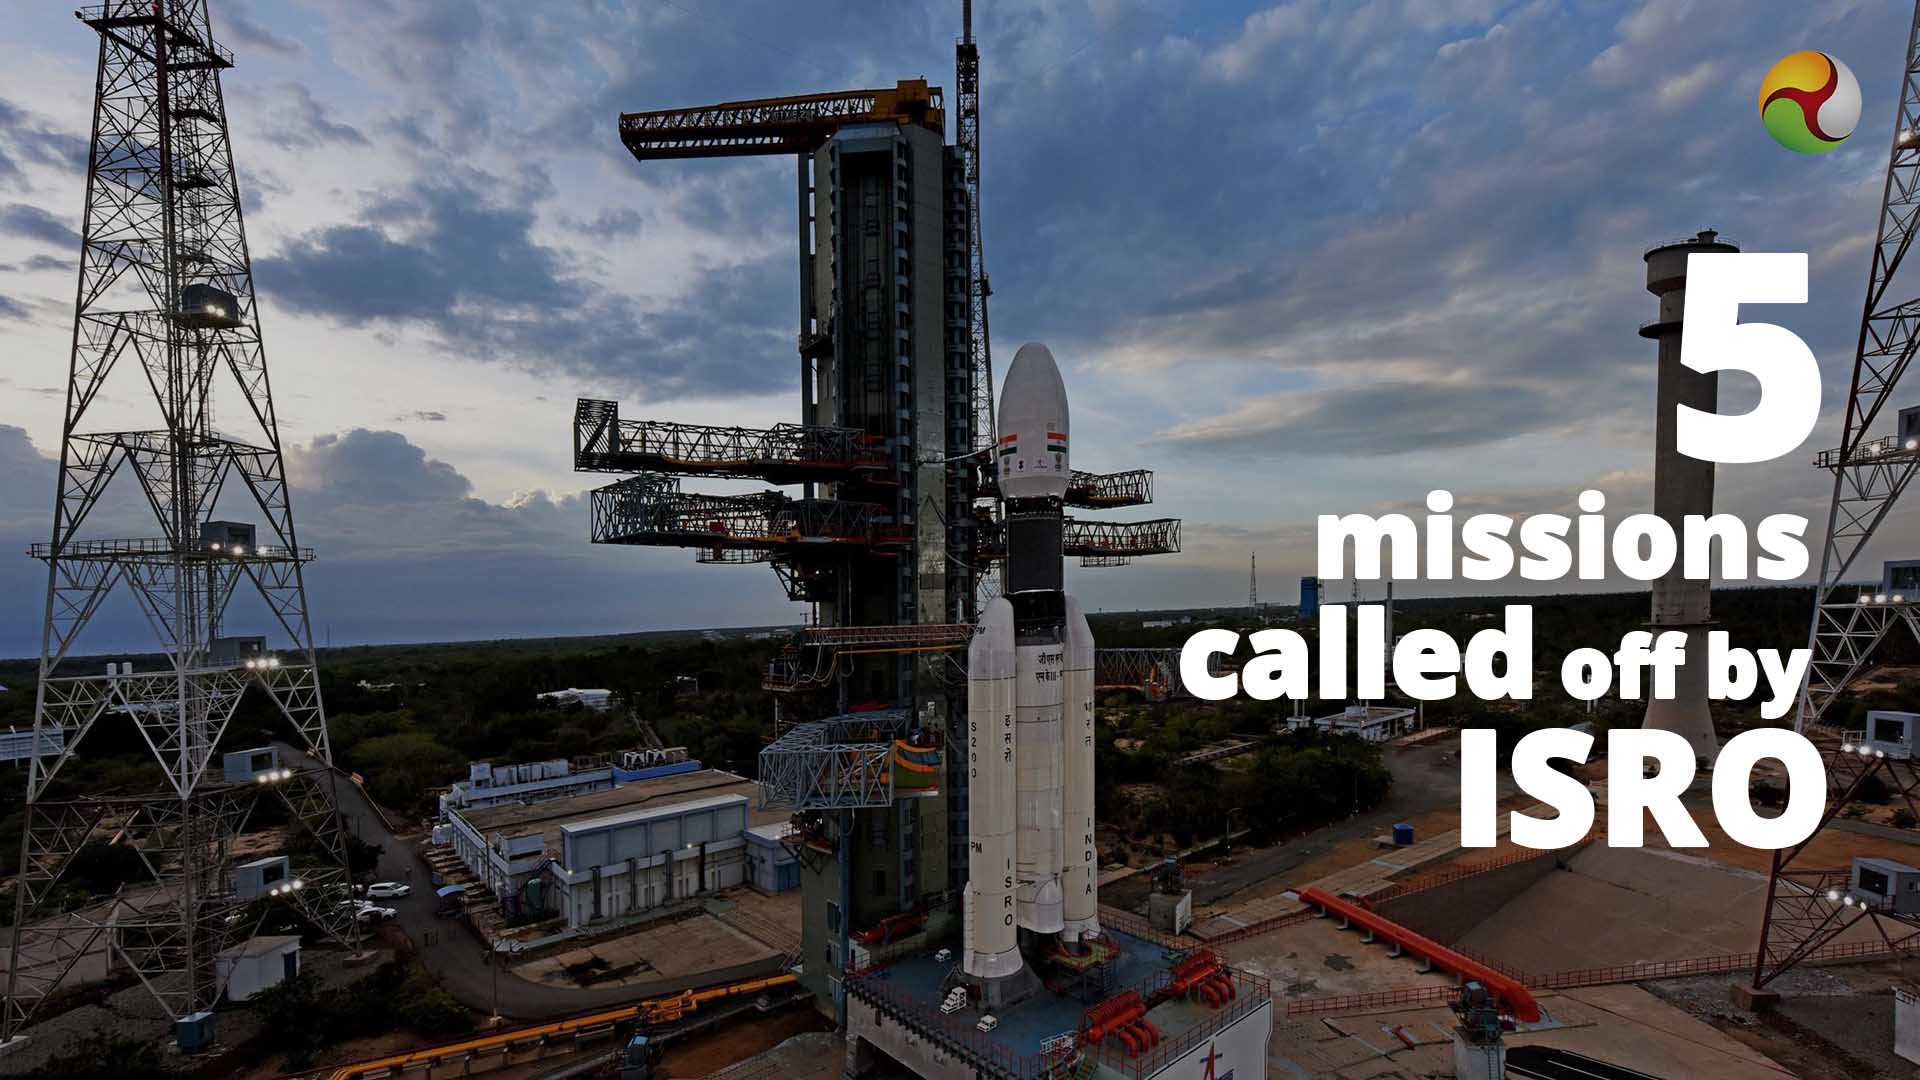 Five missions called off by ISRO